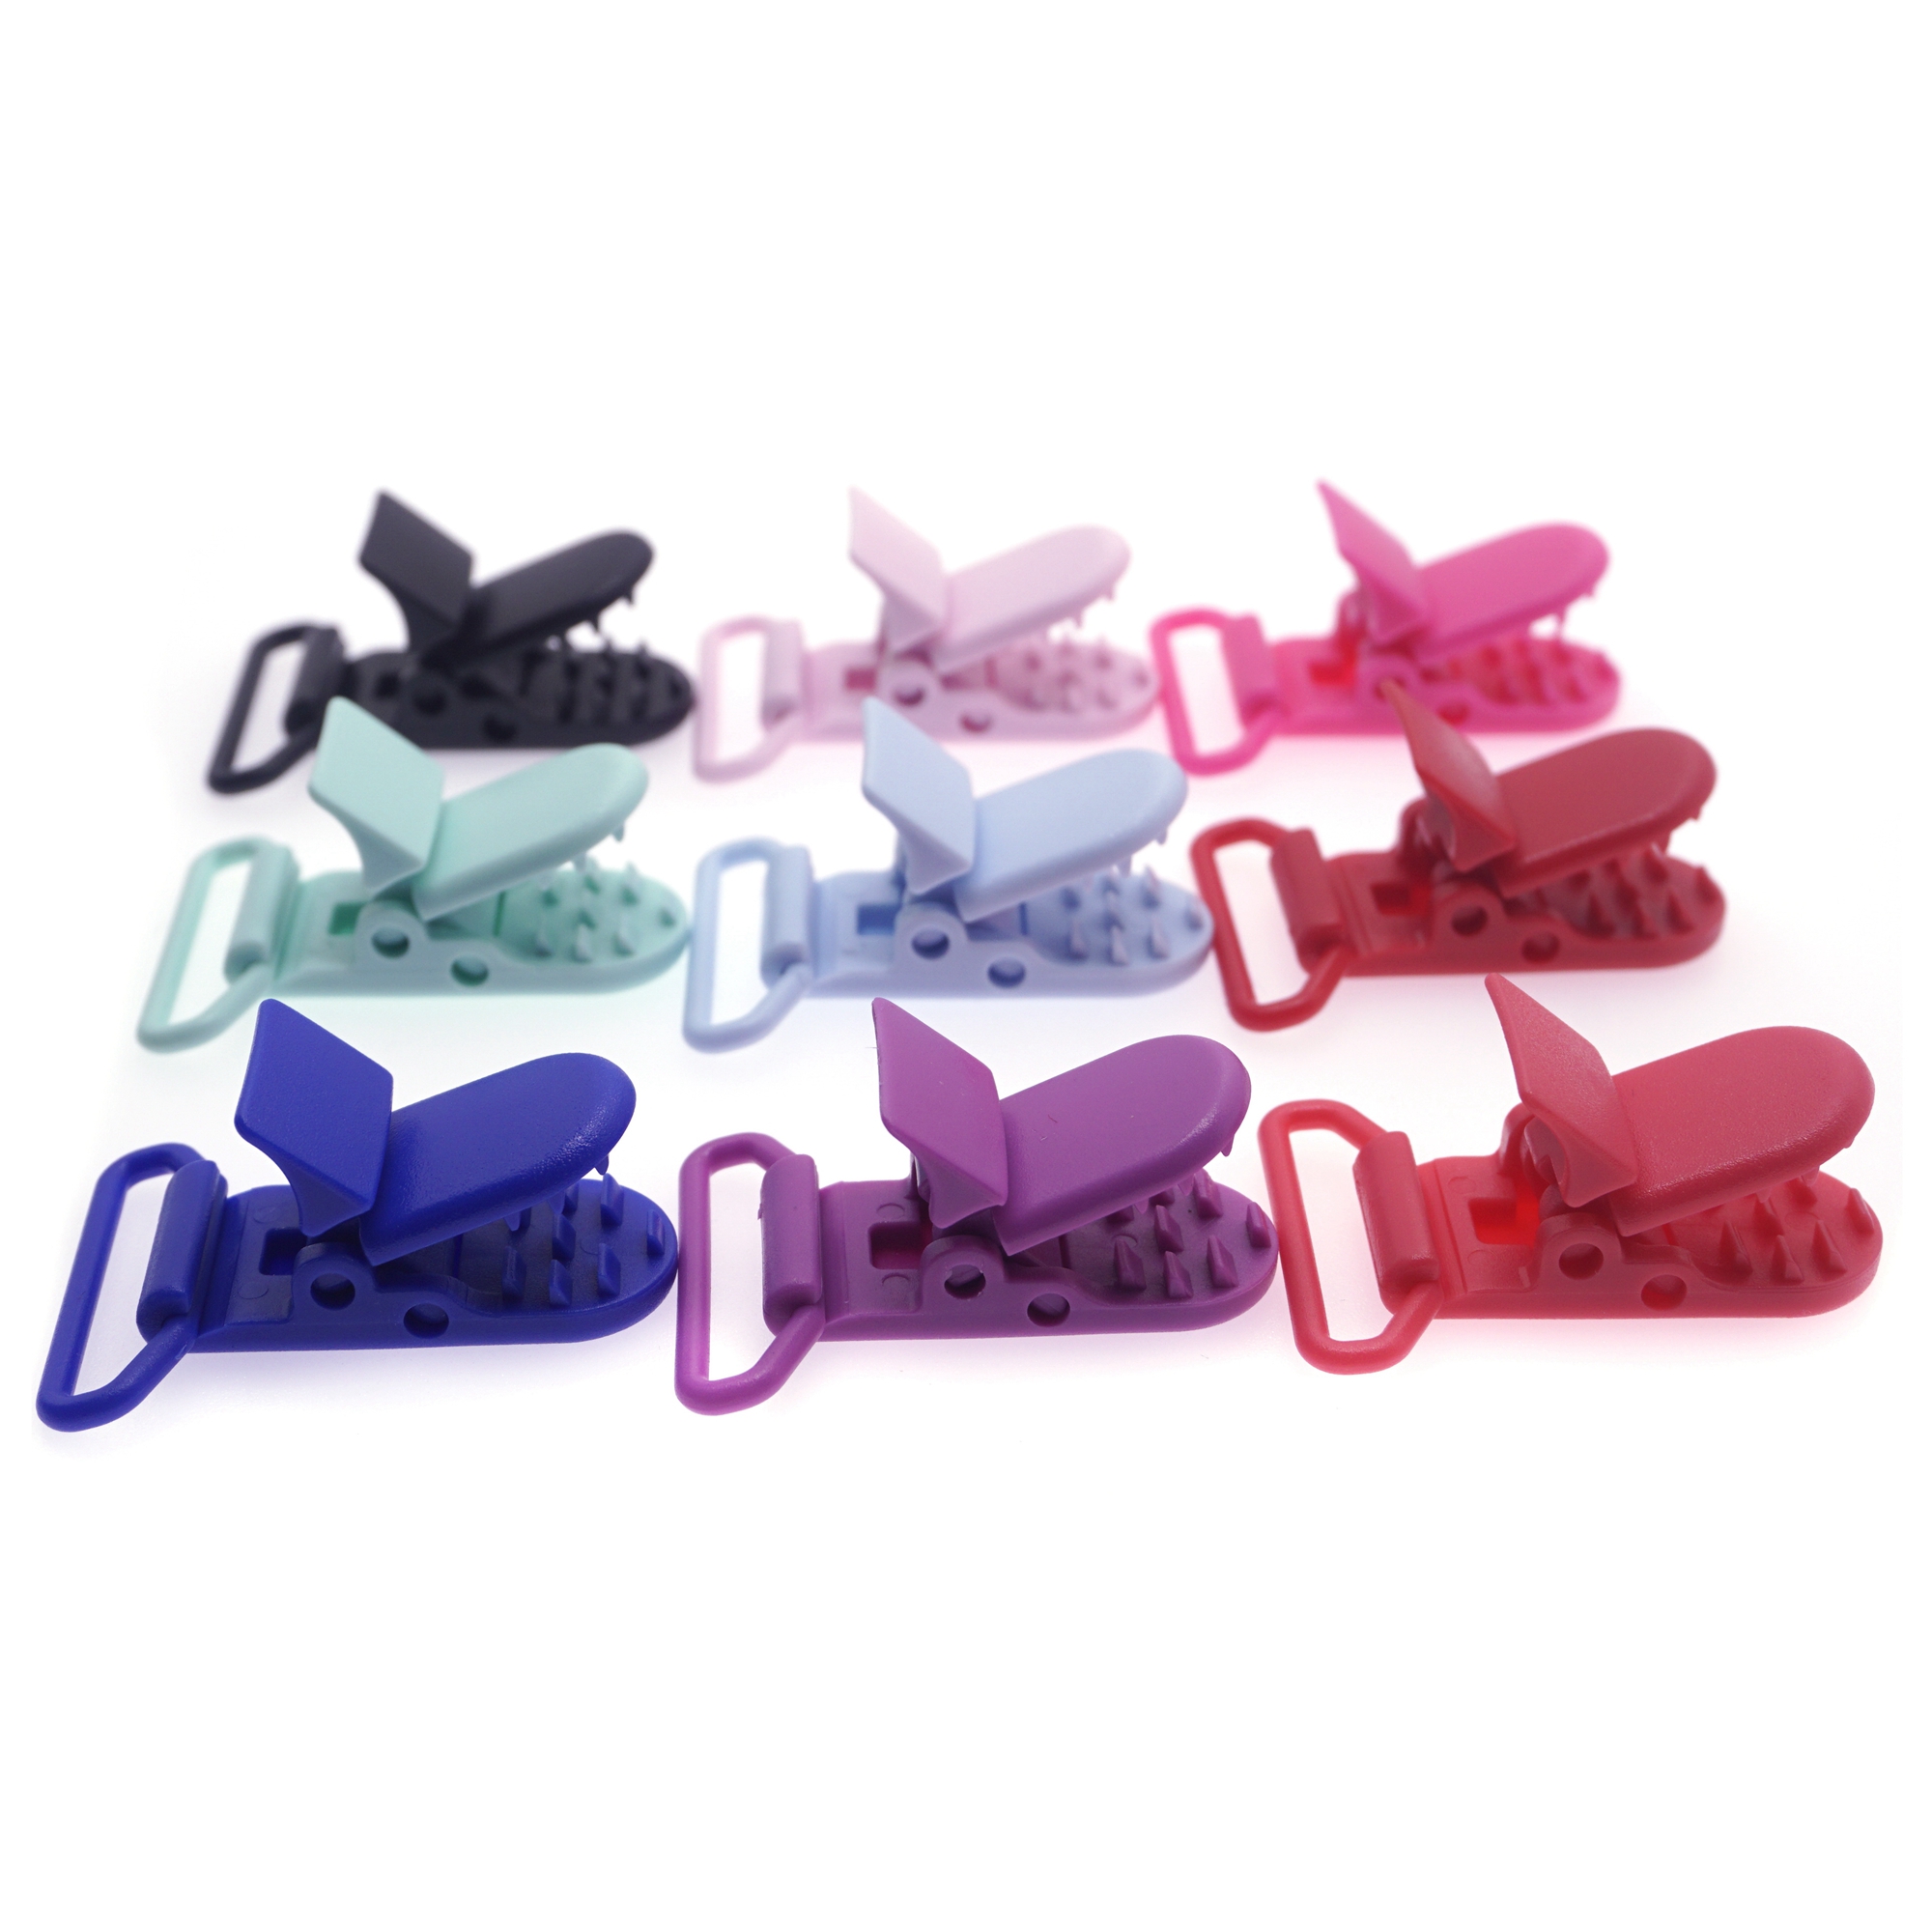 Sutoyuen 25mm 1 '' Kam Plastic Garment Binder Suspender Clips Baby Pacifier Mam Dummy Soother Cother Holder Clips 20色